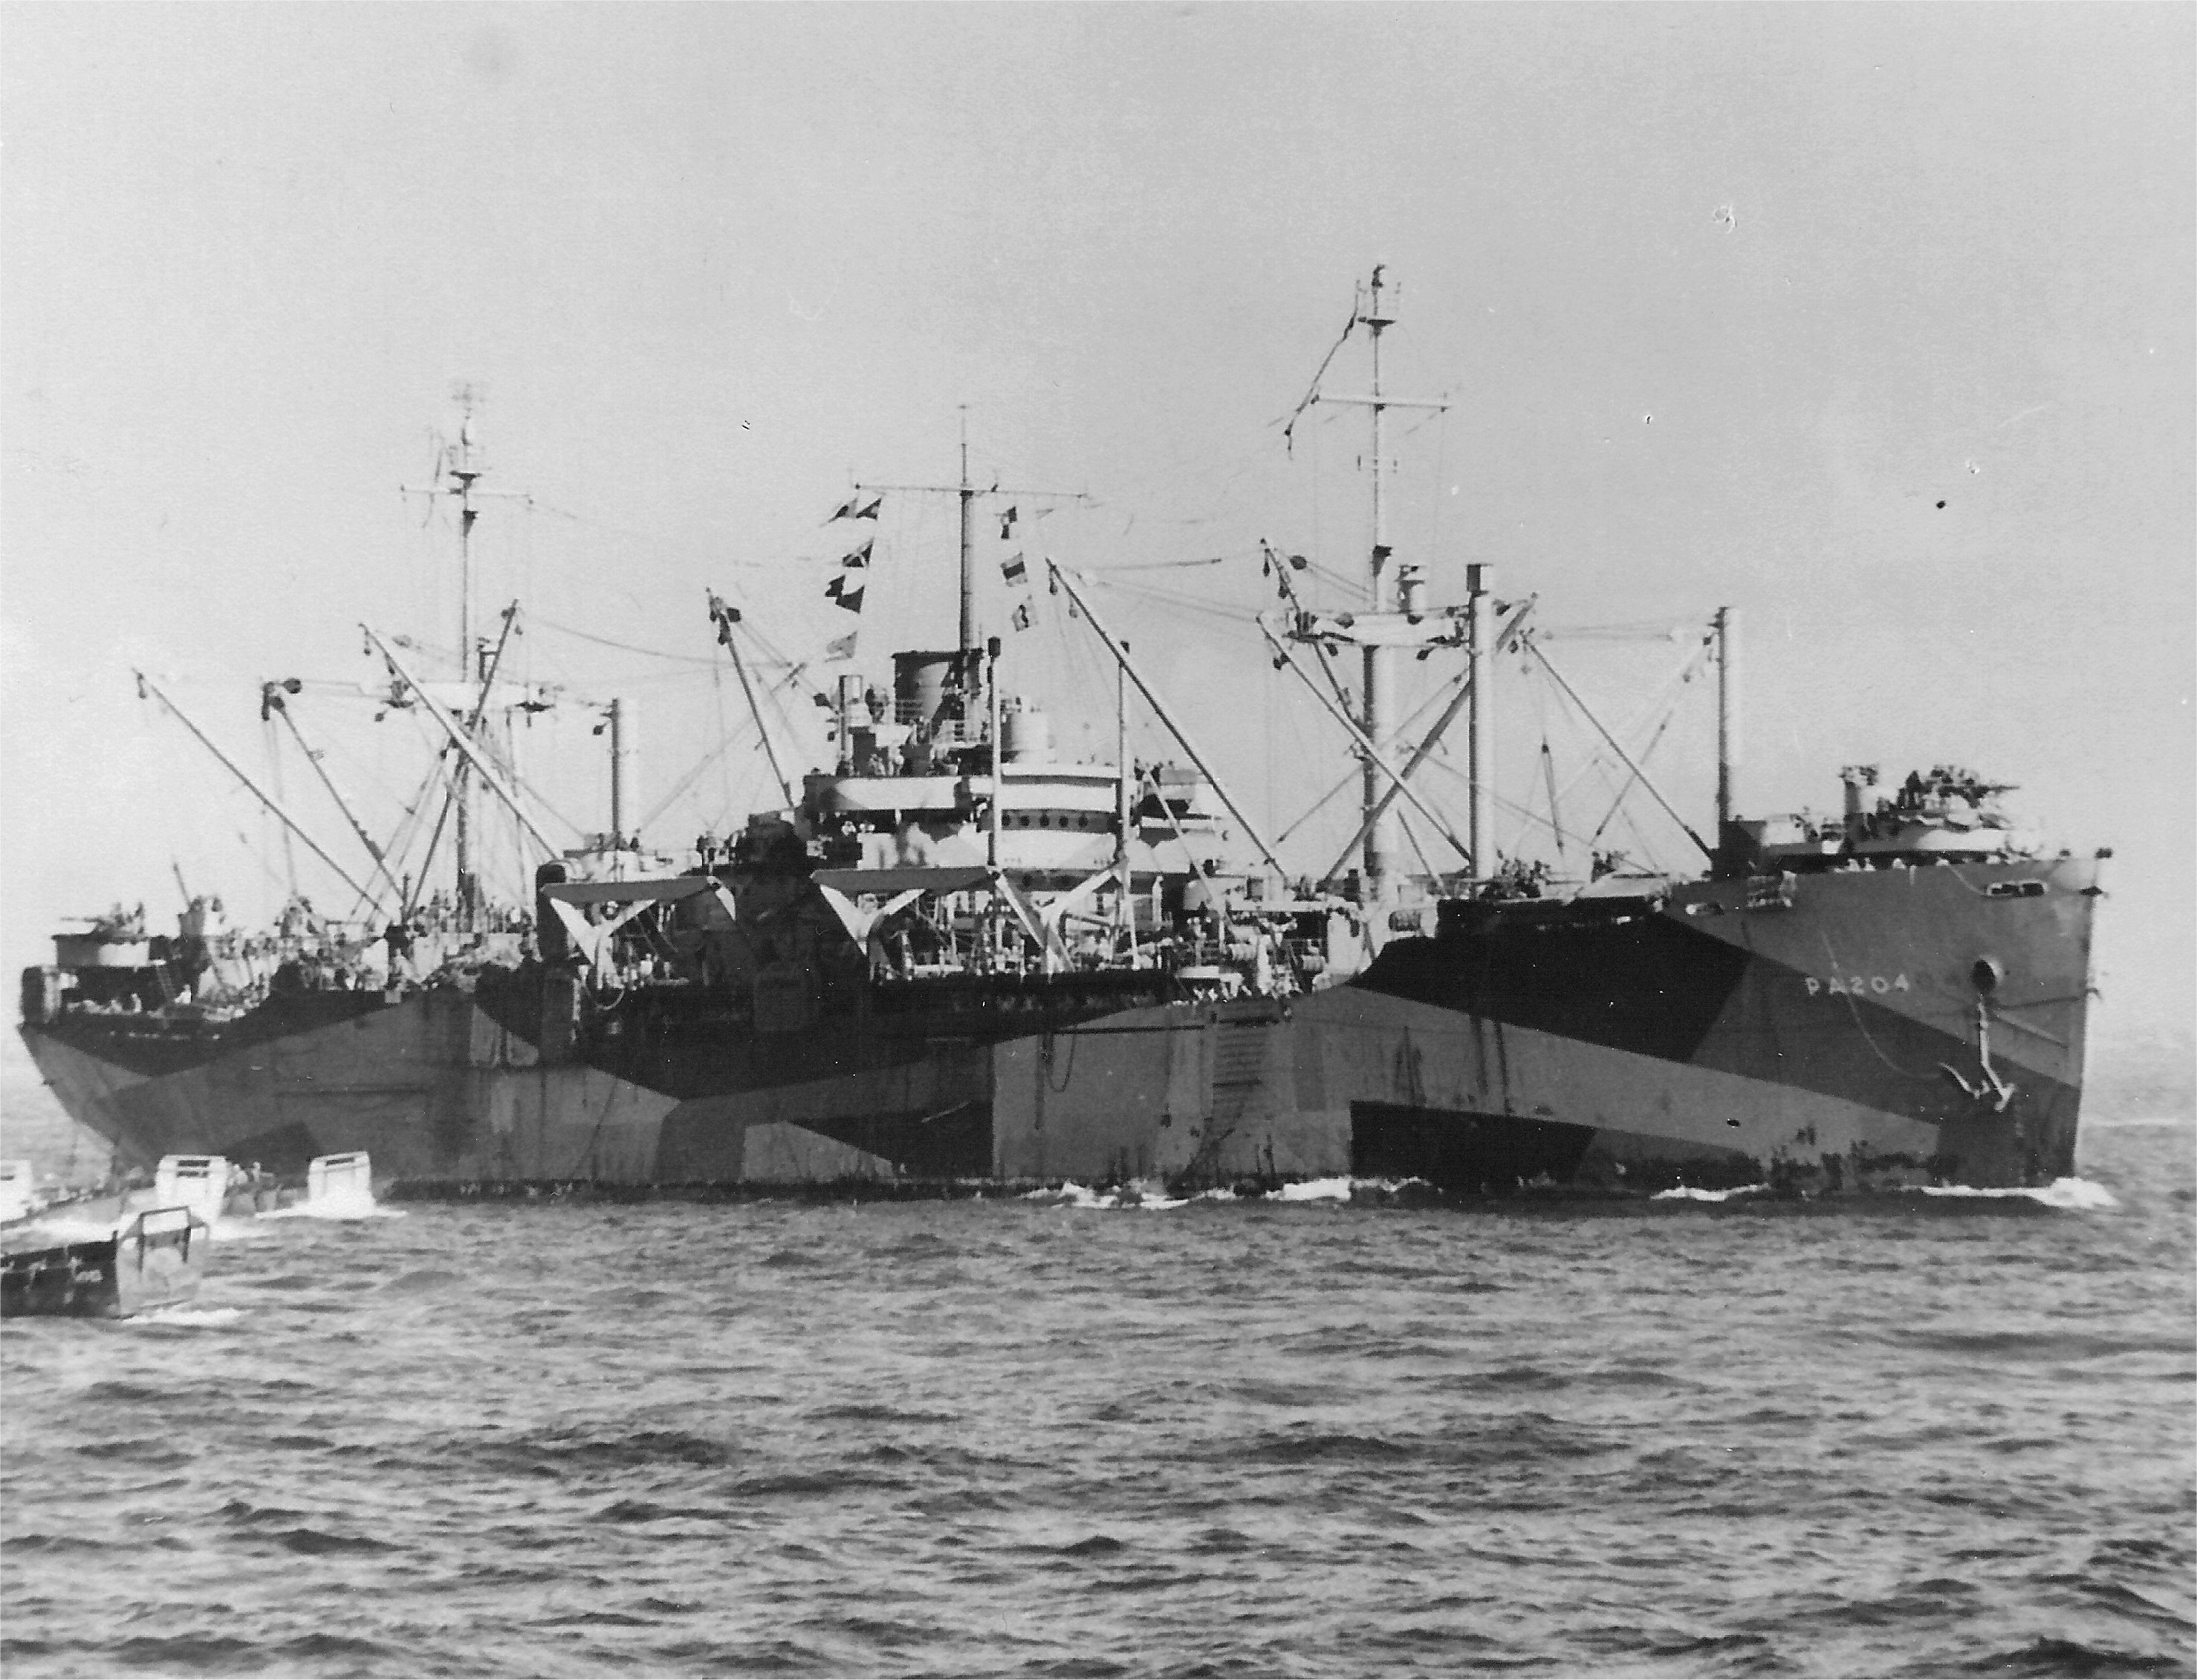 Haskell-class attack transport USS Sarasota in operation during the landings at Lingayen Gulf, Luzon, Philippine Islands, 8 Jan 1945